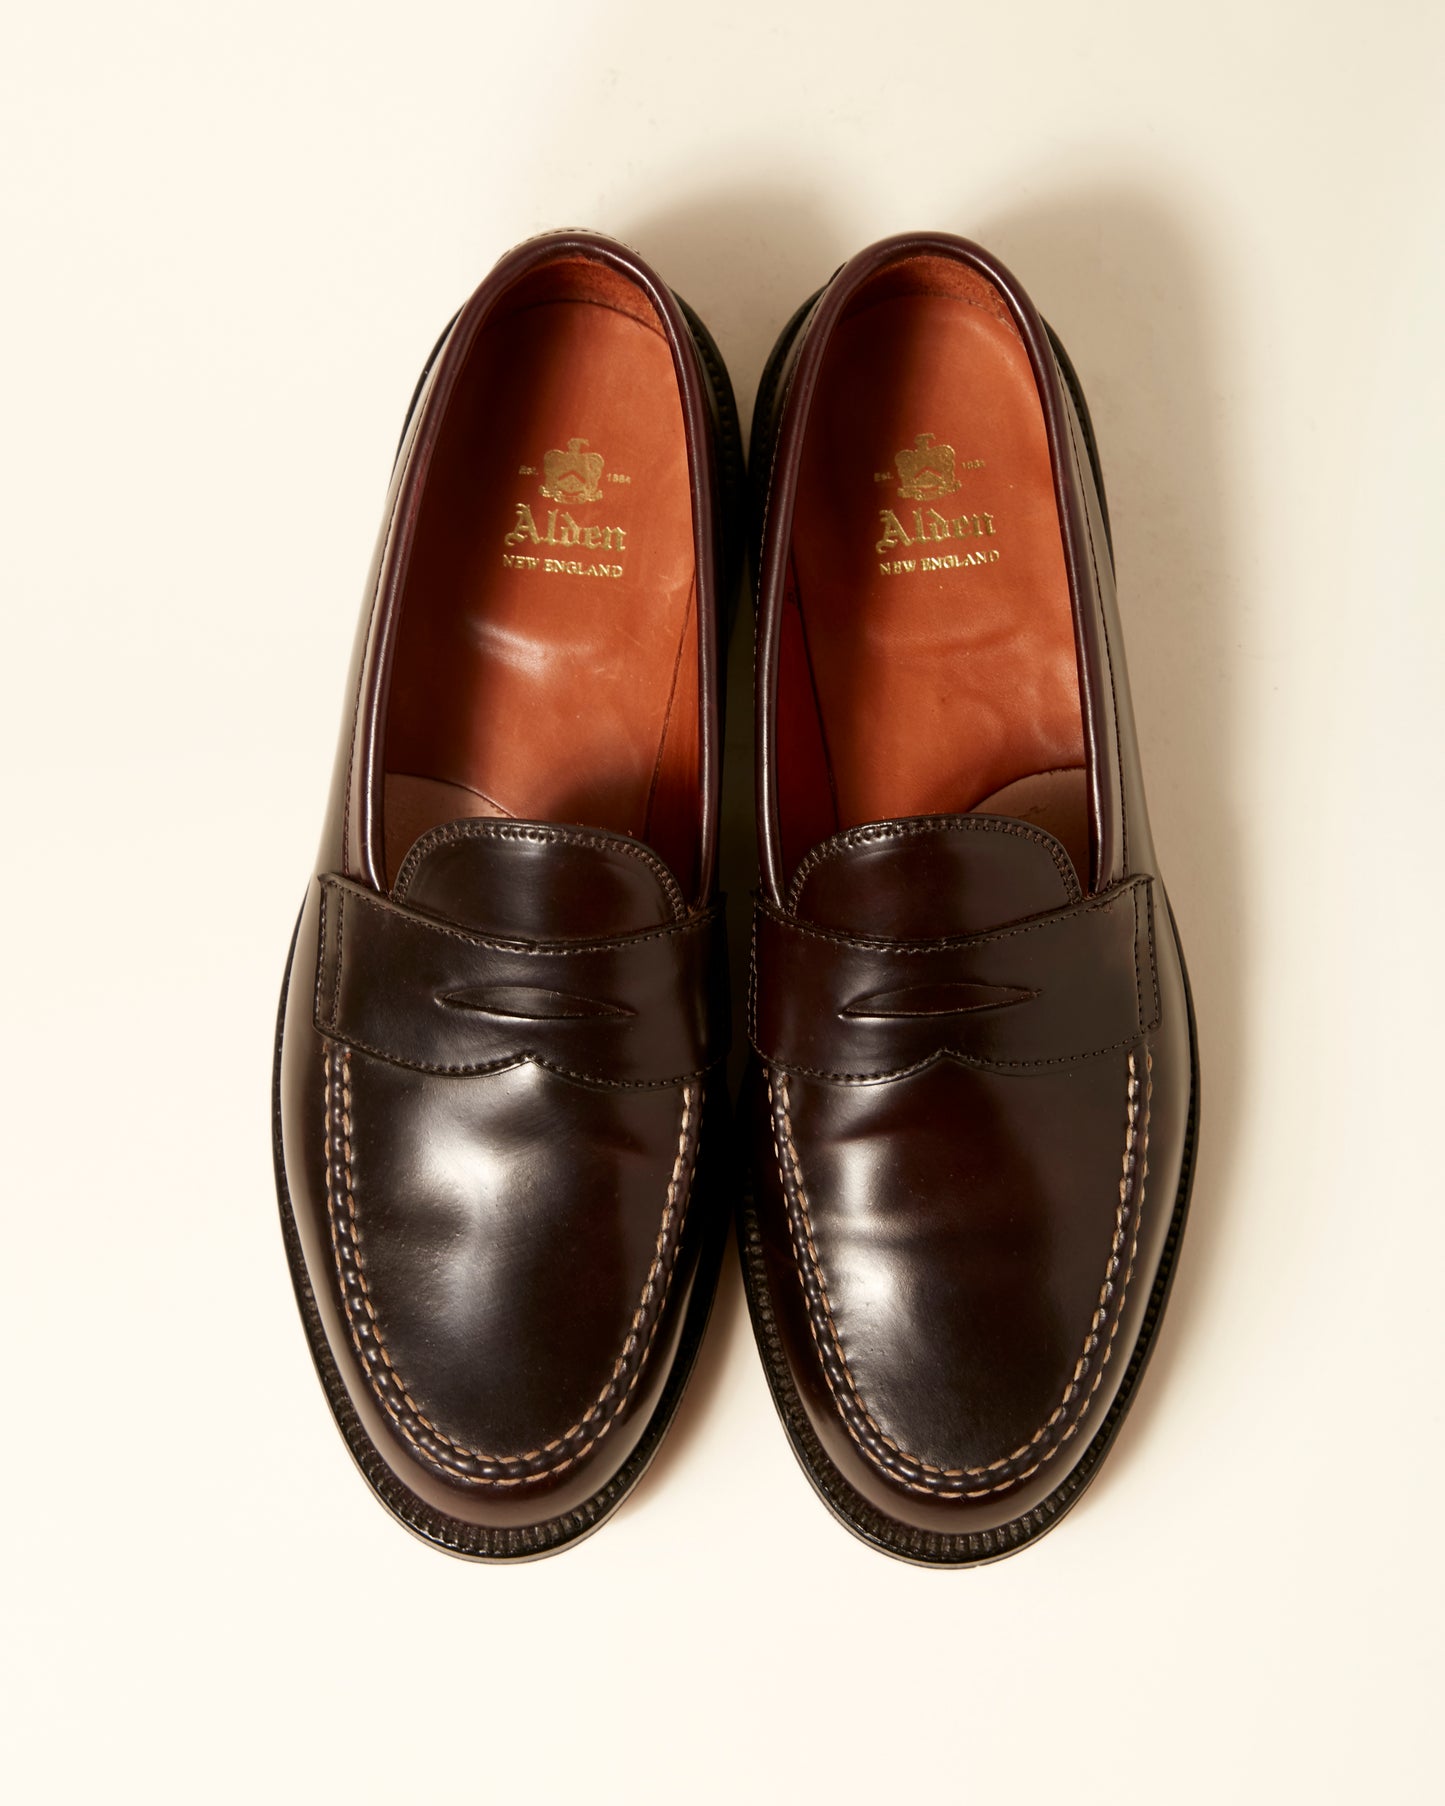 986 Leisure Handsewn Loafer in Color 8 Shell Cordovan, Van Last